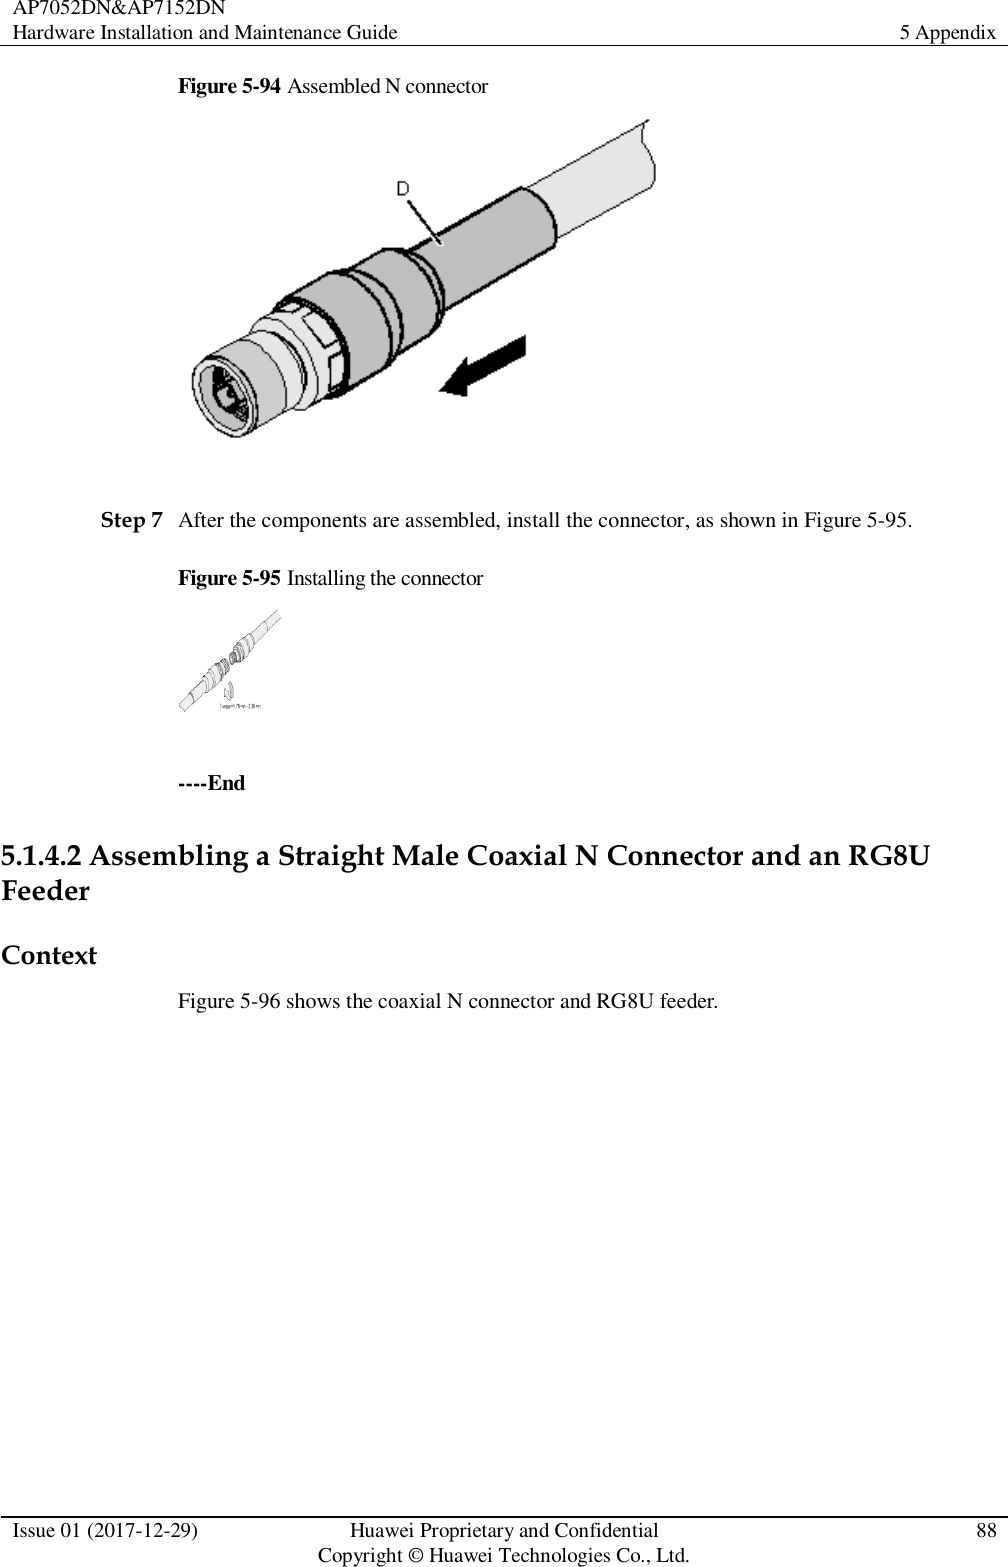 AP7052DN&amp;AP7152DN Hardware Installation and Maintenance Guide 5 Appendix  Issue 01 (2017-12-29) Huawei Proprietary and Confidential                                     Copyright © Huawei Technologies Co., Ltd. 88  Figure 5-94 Assembled N connector   Step 7 After the components are assembled, install the connector, as shown in Figure 5-95. Figure 5-95 Installing the connector   ----End 5.1.4.2 Assembling a Straight Male Coaxial N Connector and an RG8U Feeder Context Figure 5-96 shows the coaxial N connector and RG8U feeder. 